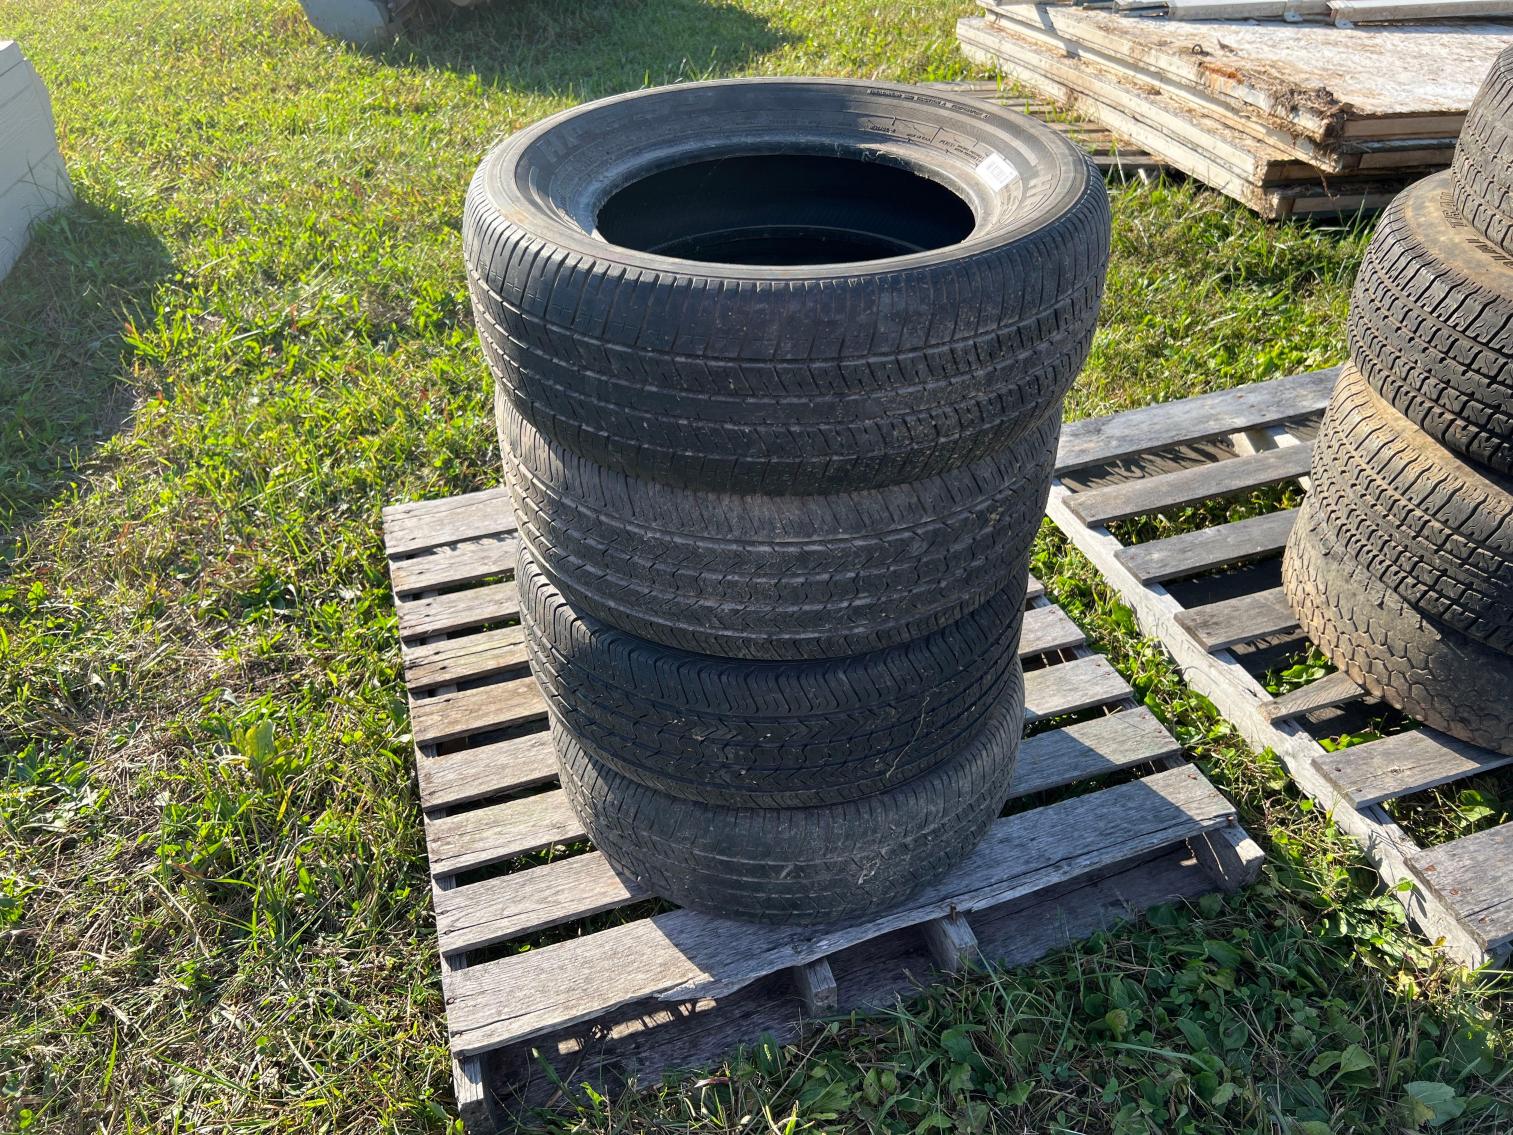 Image for Group of 4 Tires- 2 Michelin 21560R15, 2 HP259 tires size 21560R15